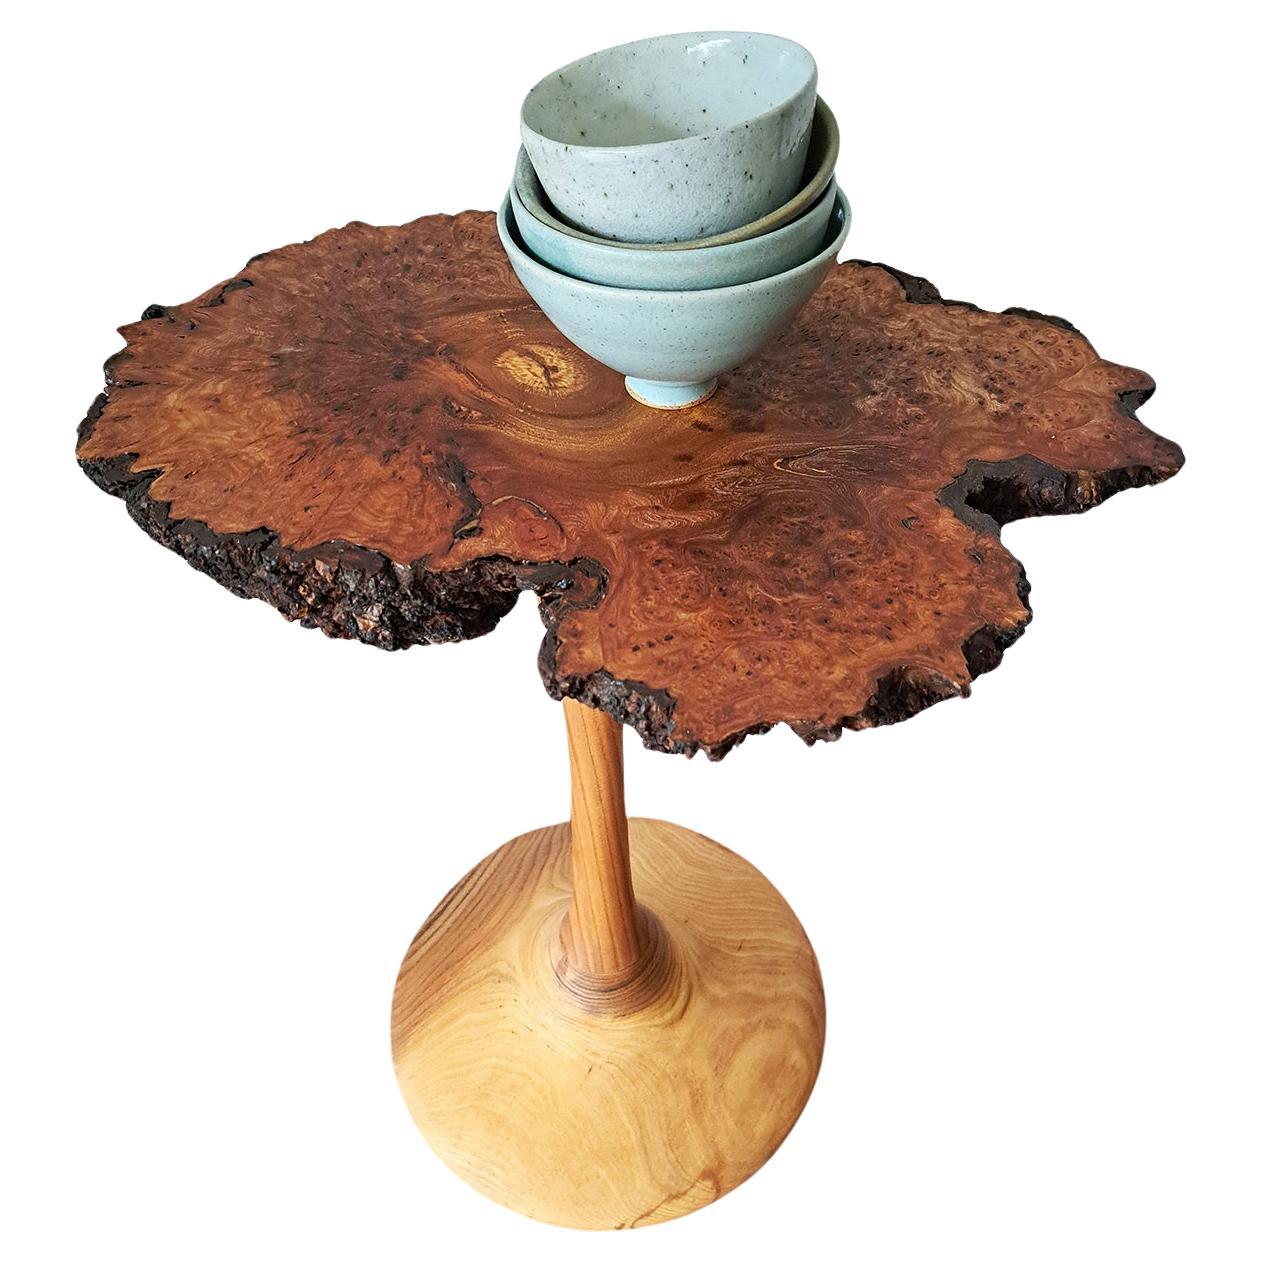 Handcrafted Freeform Live Edge Solid Burl Elm side/ end Table. A beautifully handcrafted piece by designer John Alfredo Harris. British designer. Elm burl Organic shape top with a turned elm wood base. One off! 